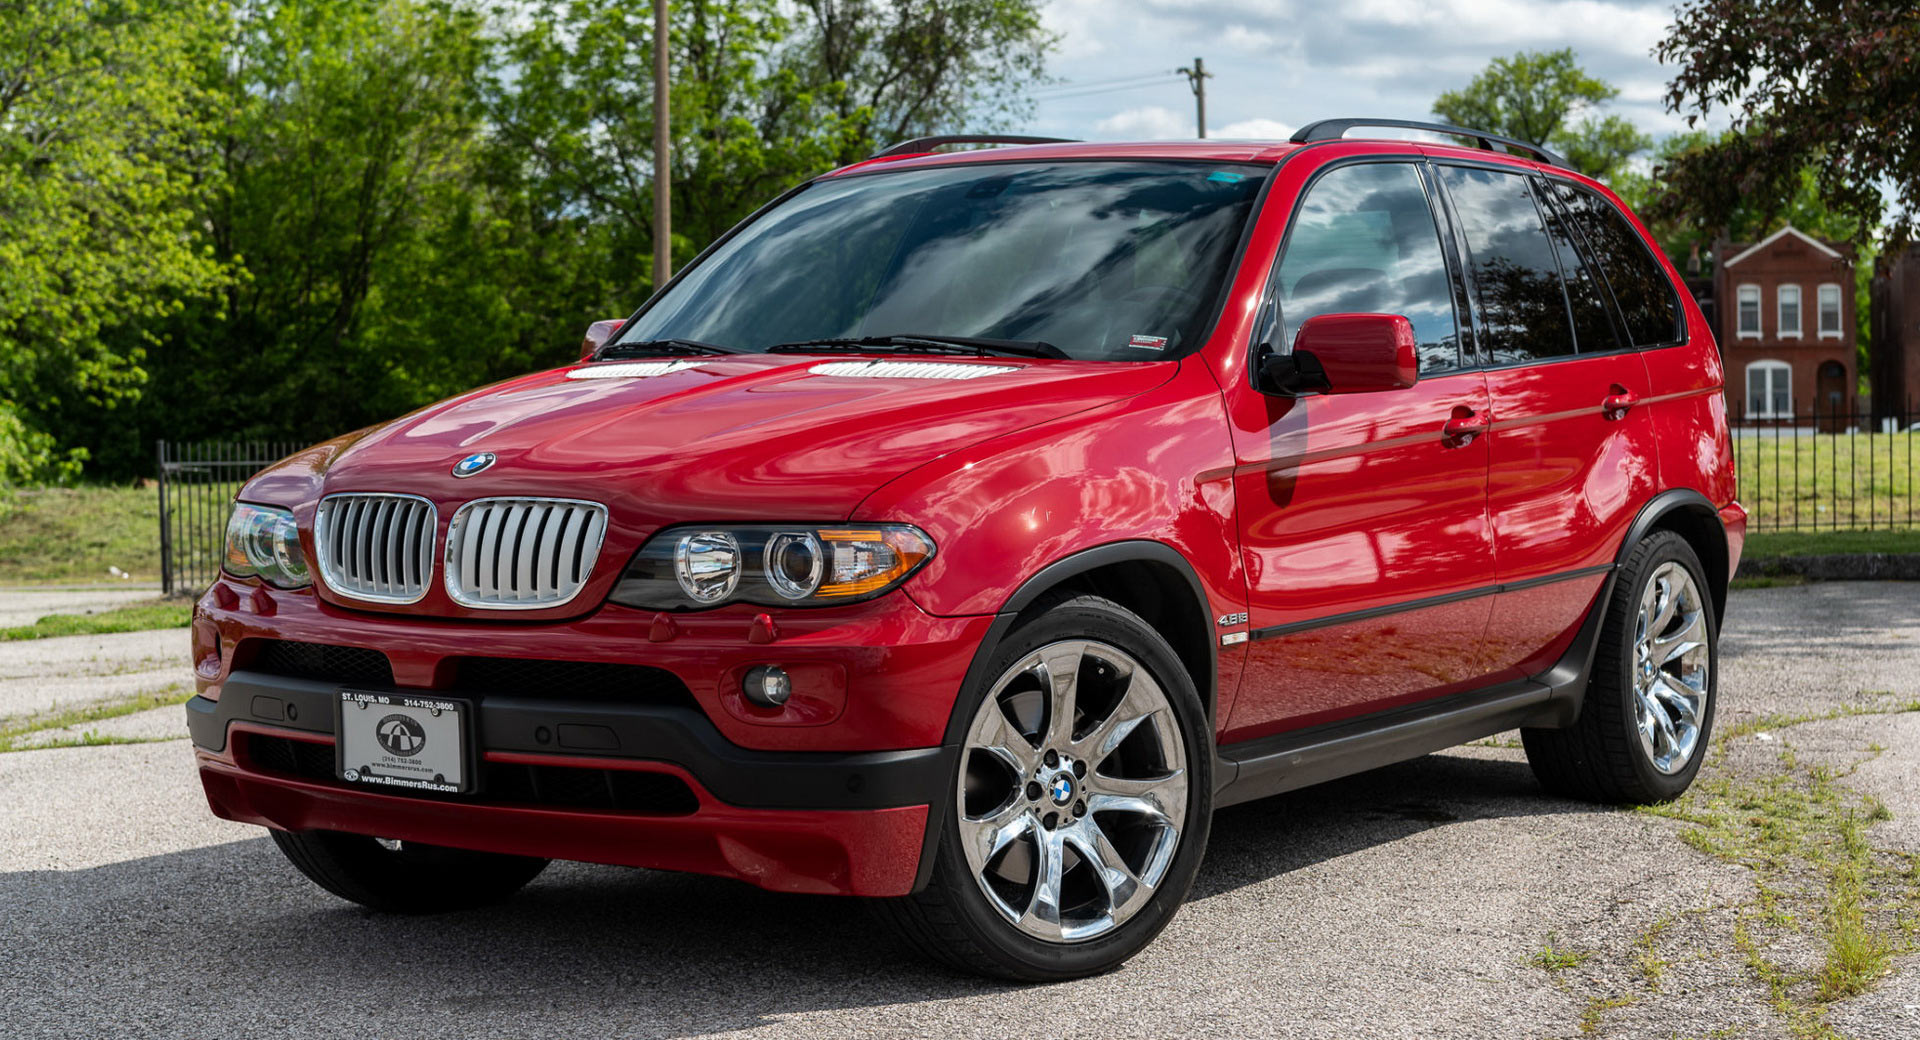 Imola Red 2004 BMW X5 4.8iS: Pay Tribute (And Maintenance) To The